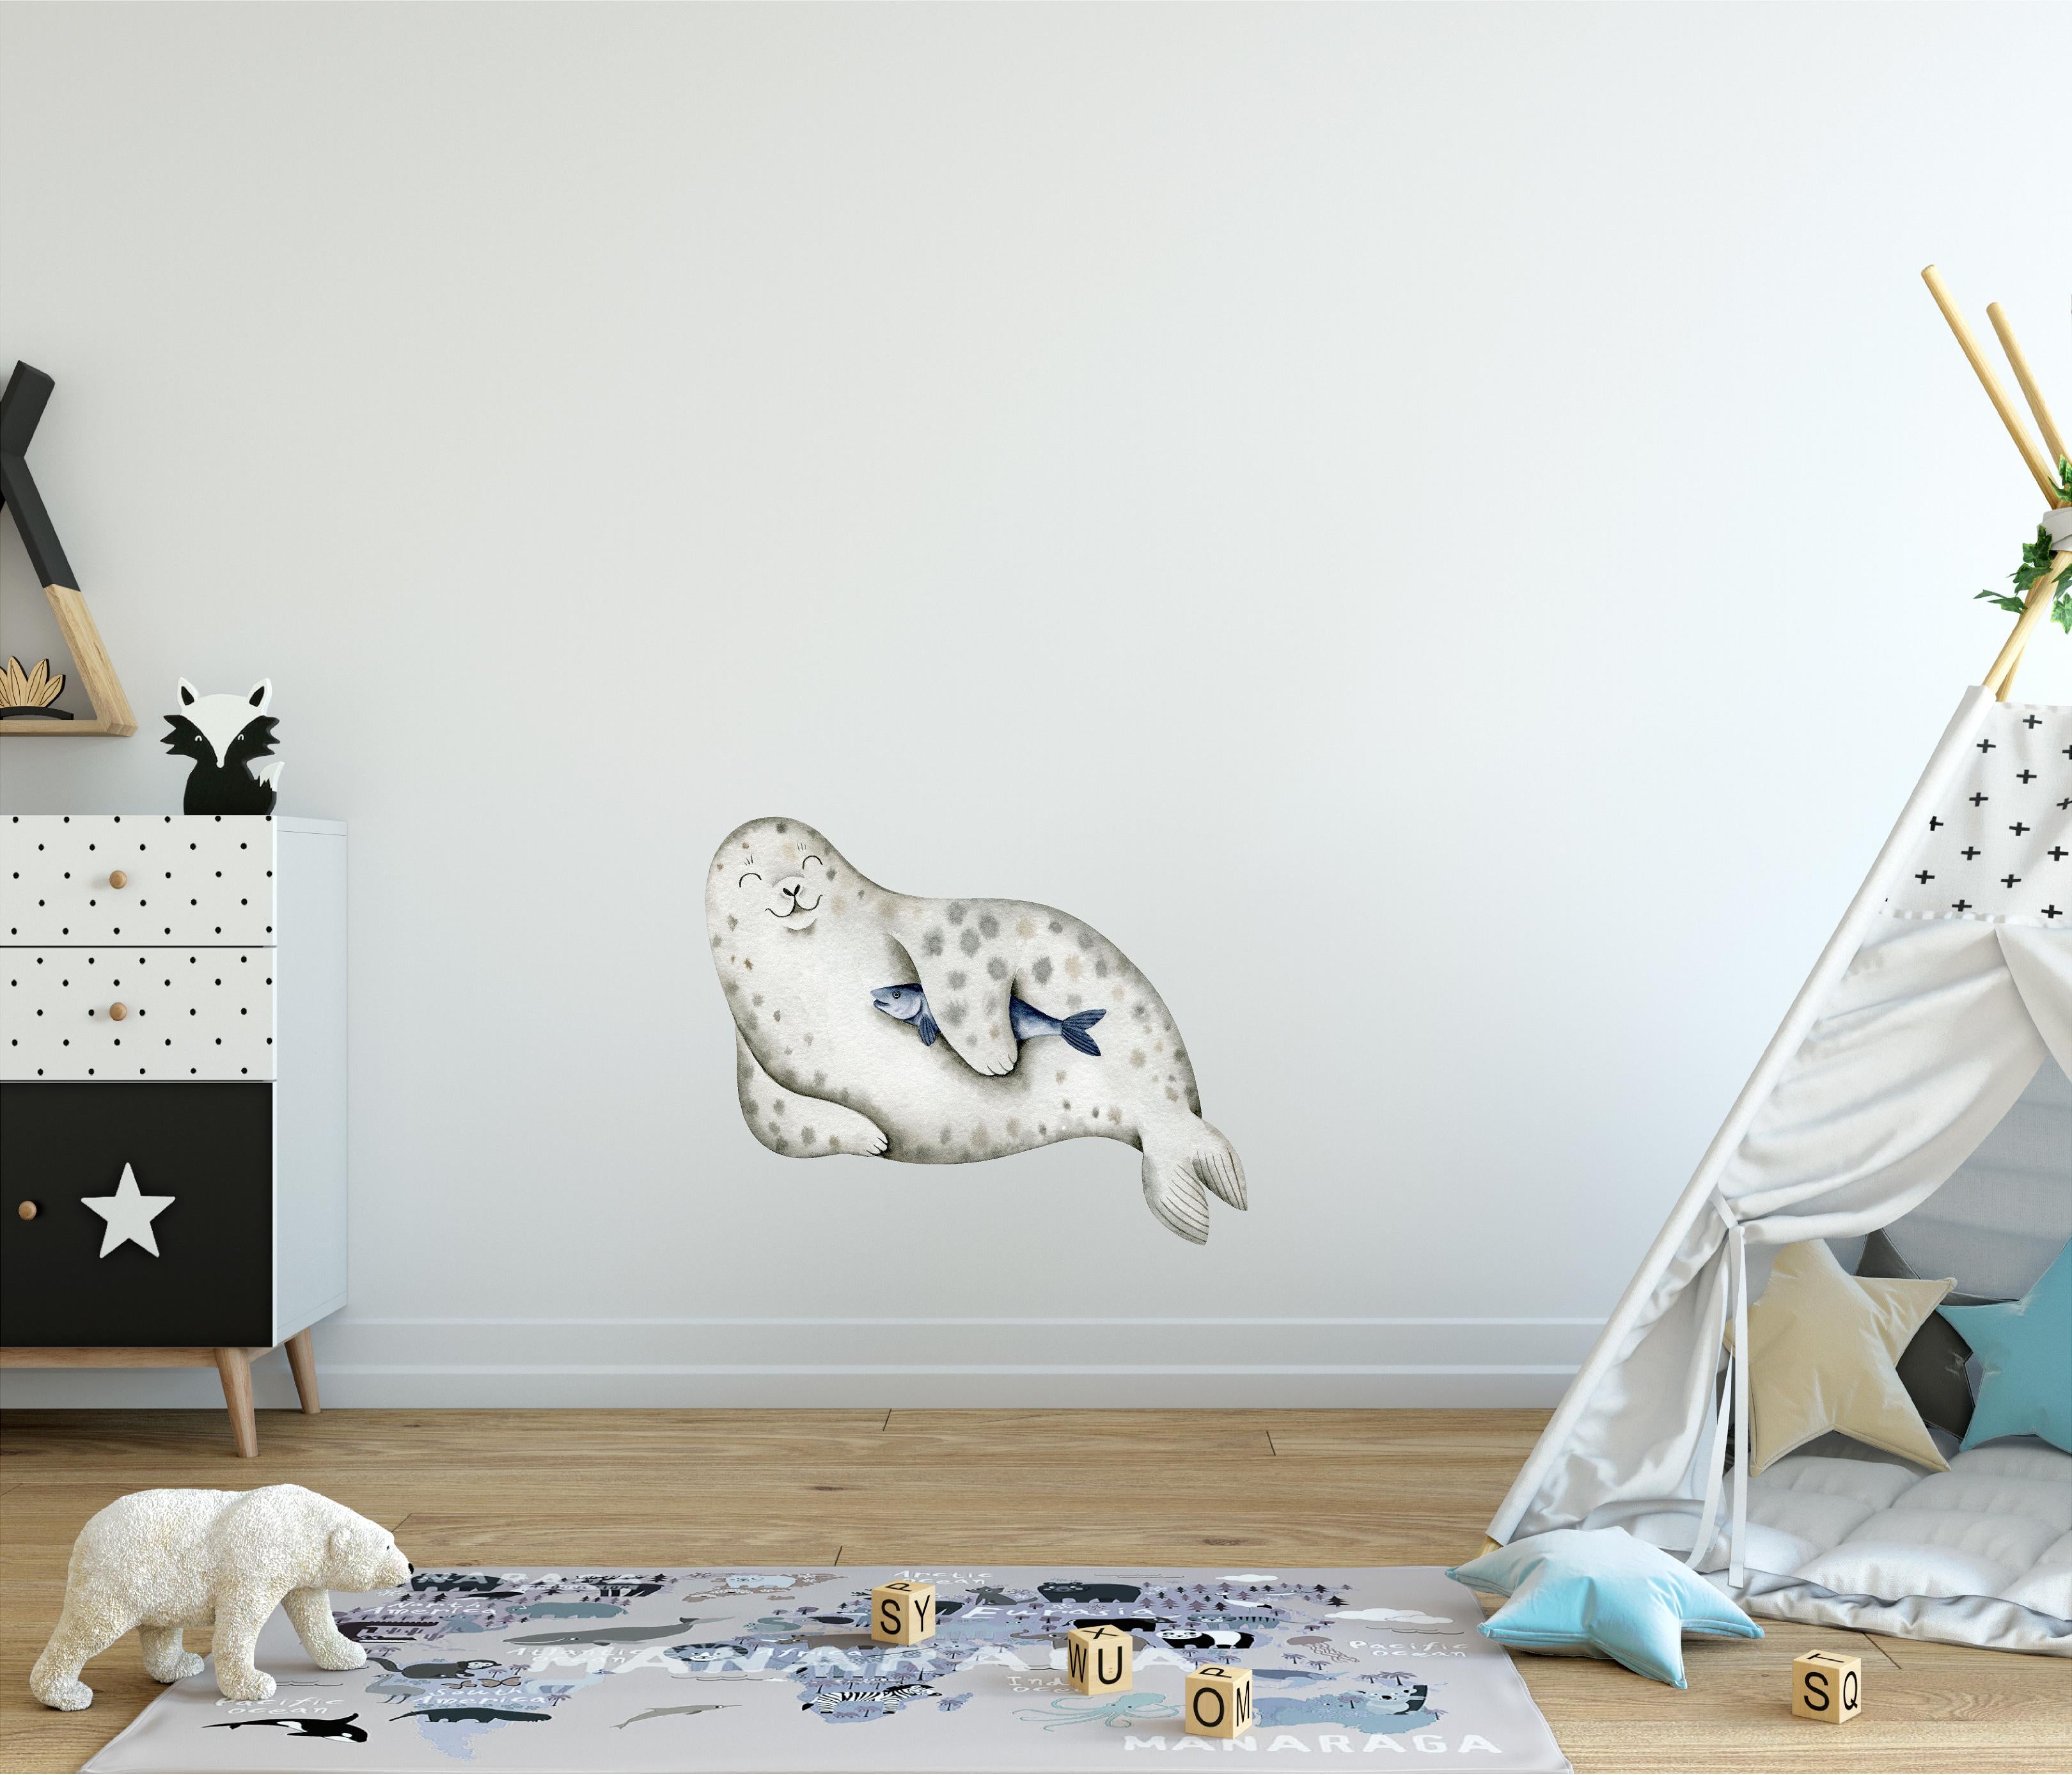 Cartoon Seal Holding Fish Wall Decal Removable Fabric Wall Sticker | DecalBaby